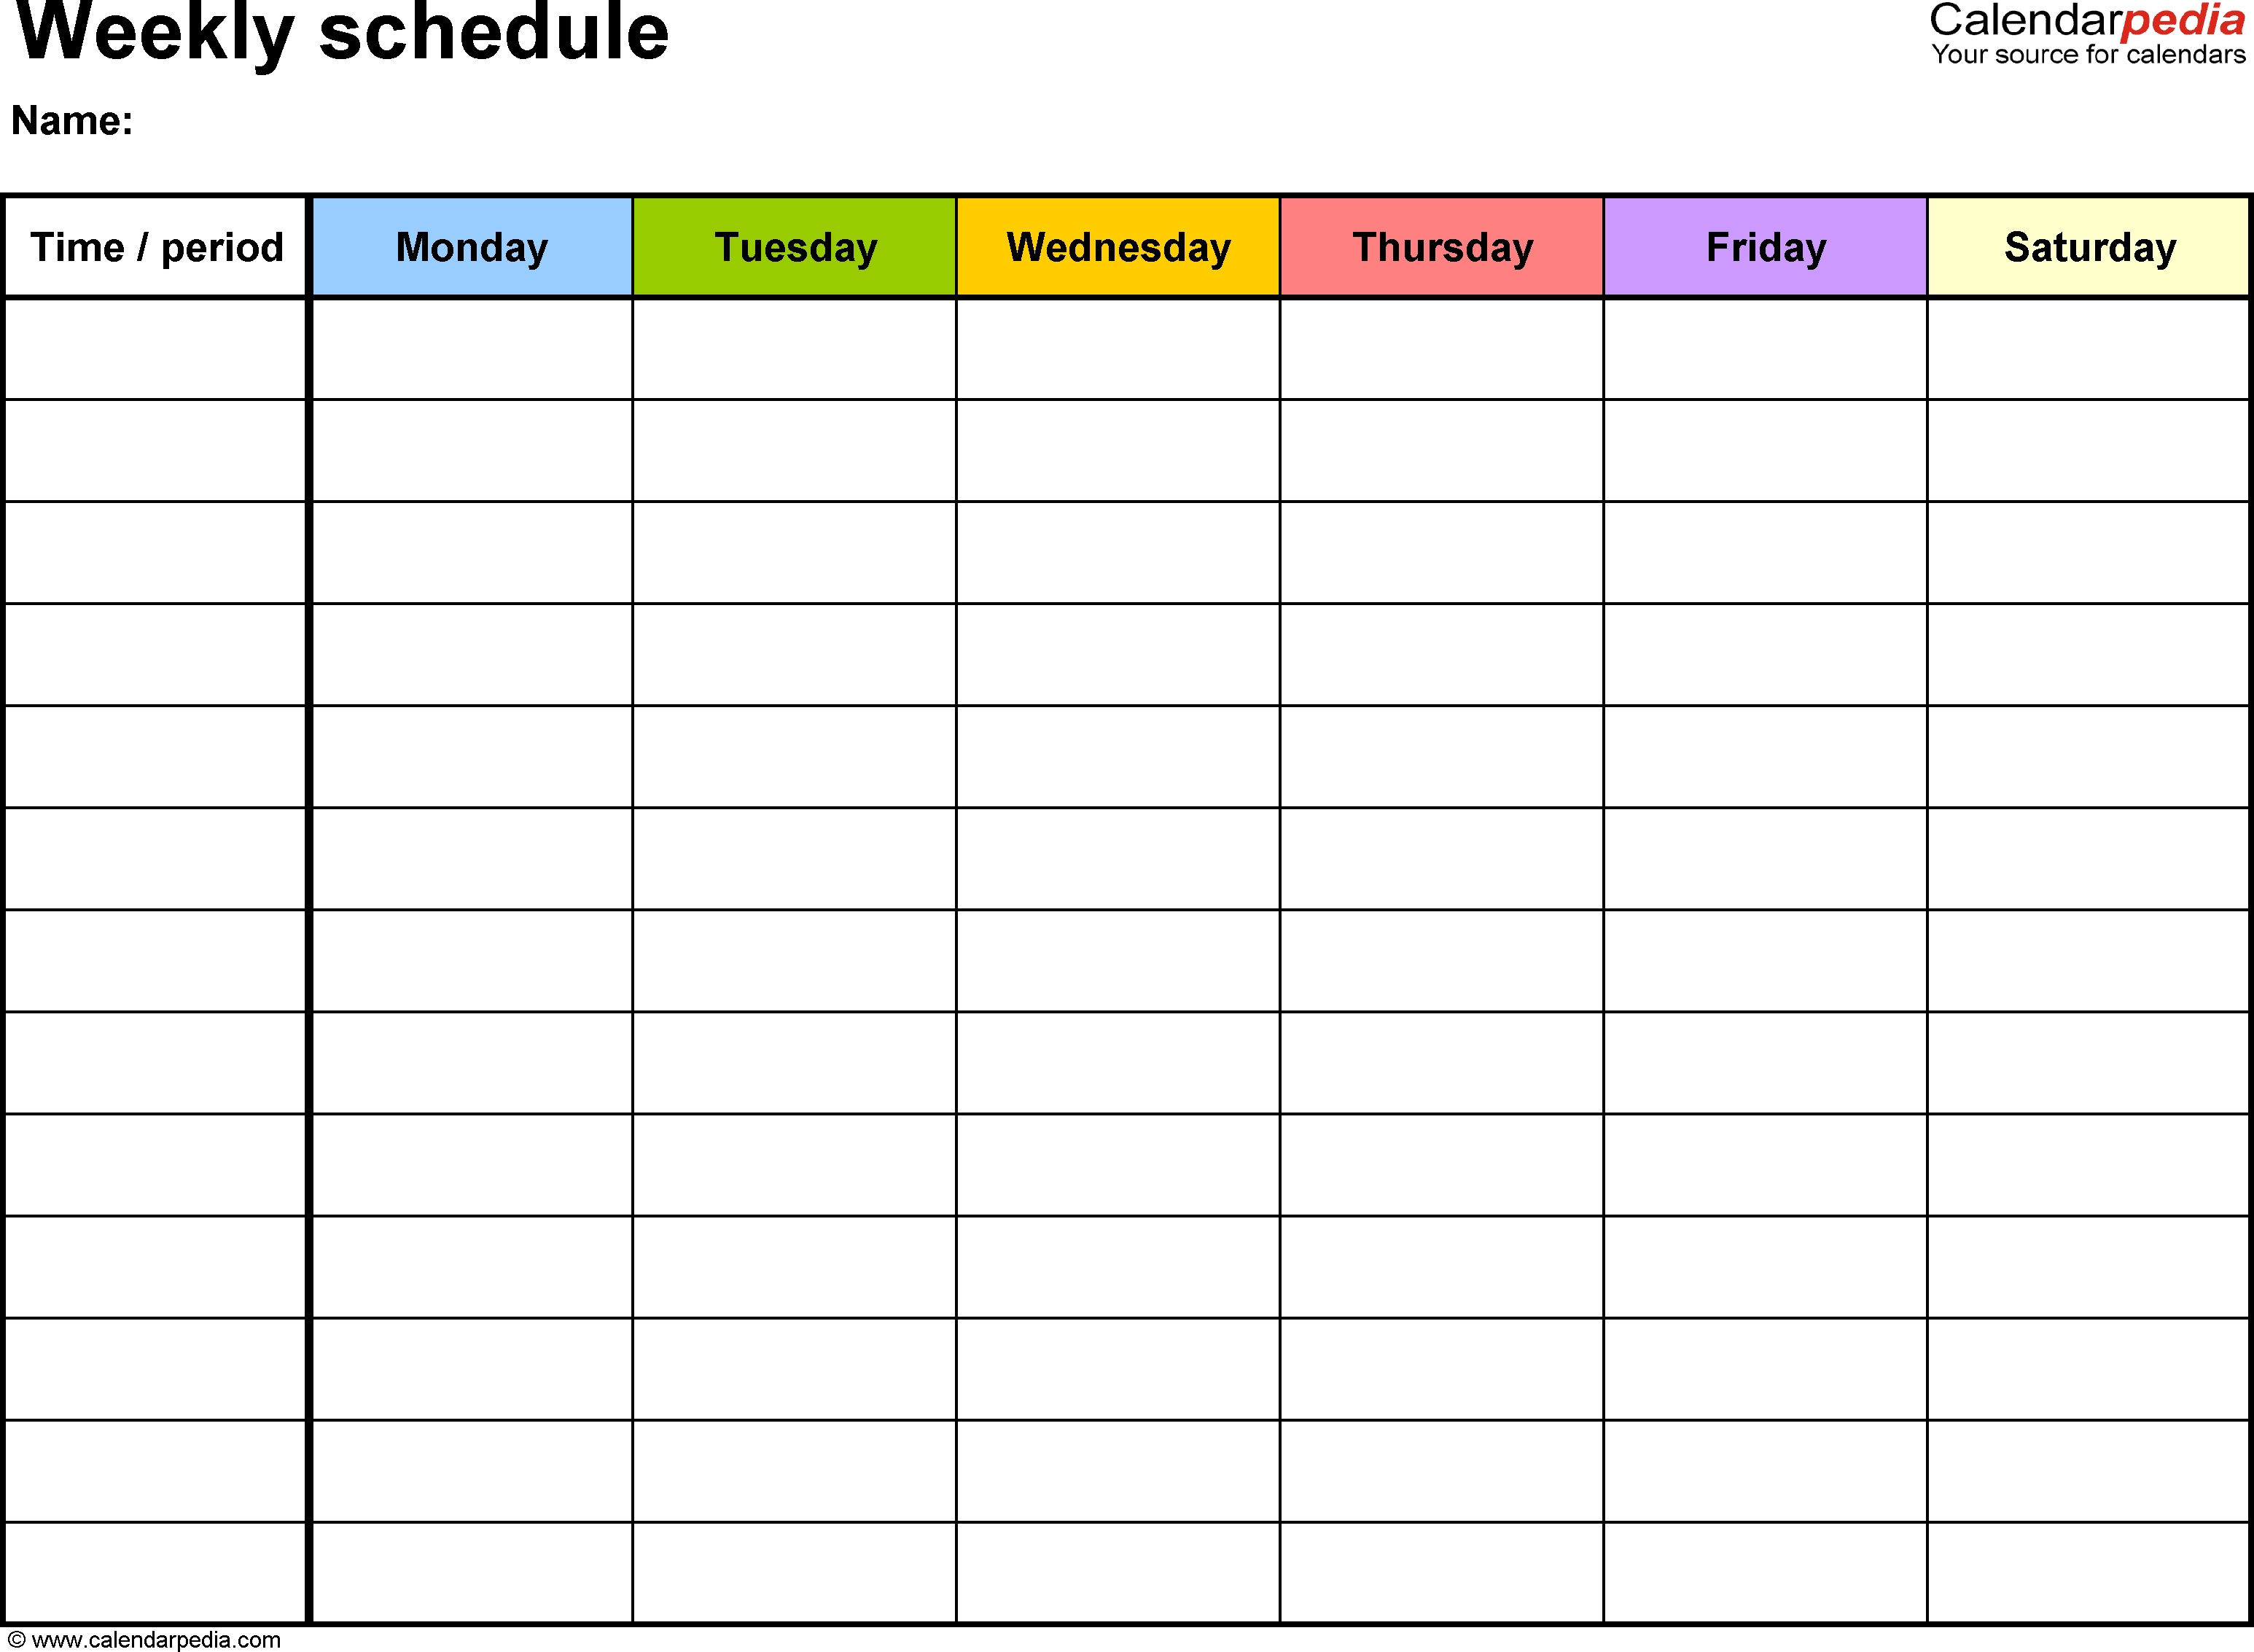 Weekly Schedule Template Monday Friday With Times - Firuse Monday Friday Calendar Template Printable